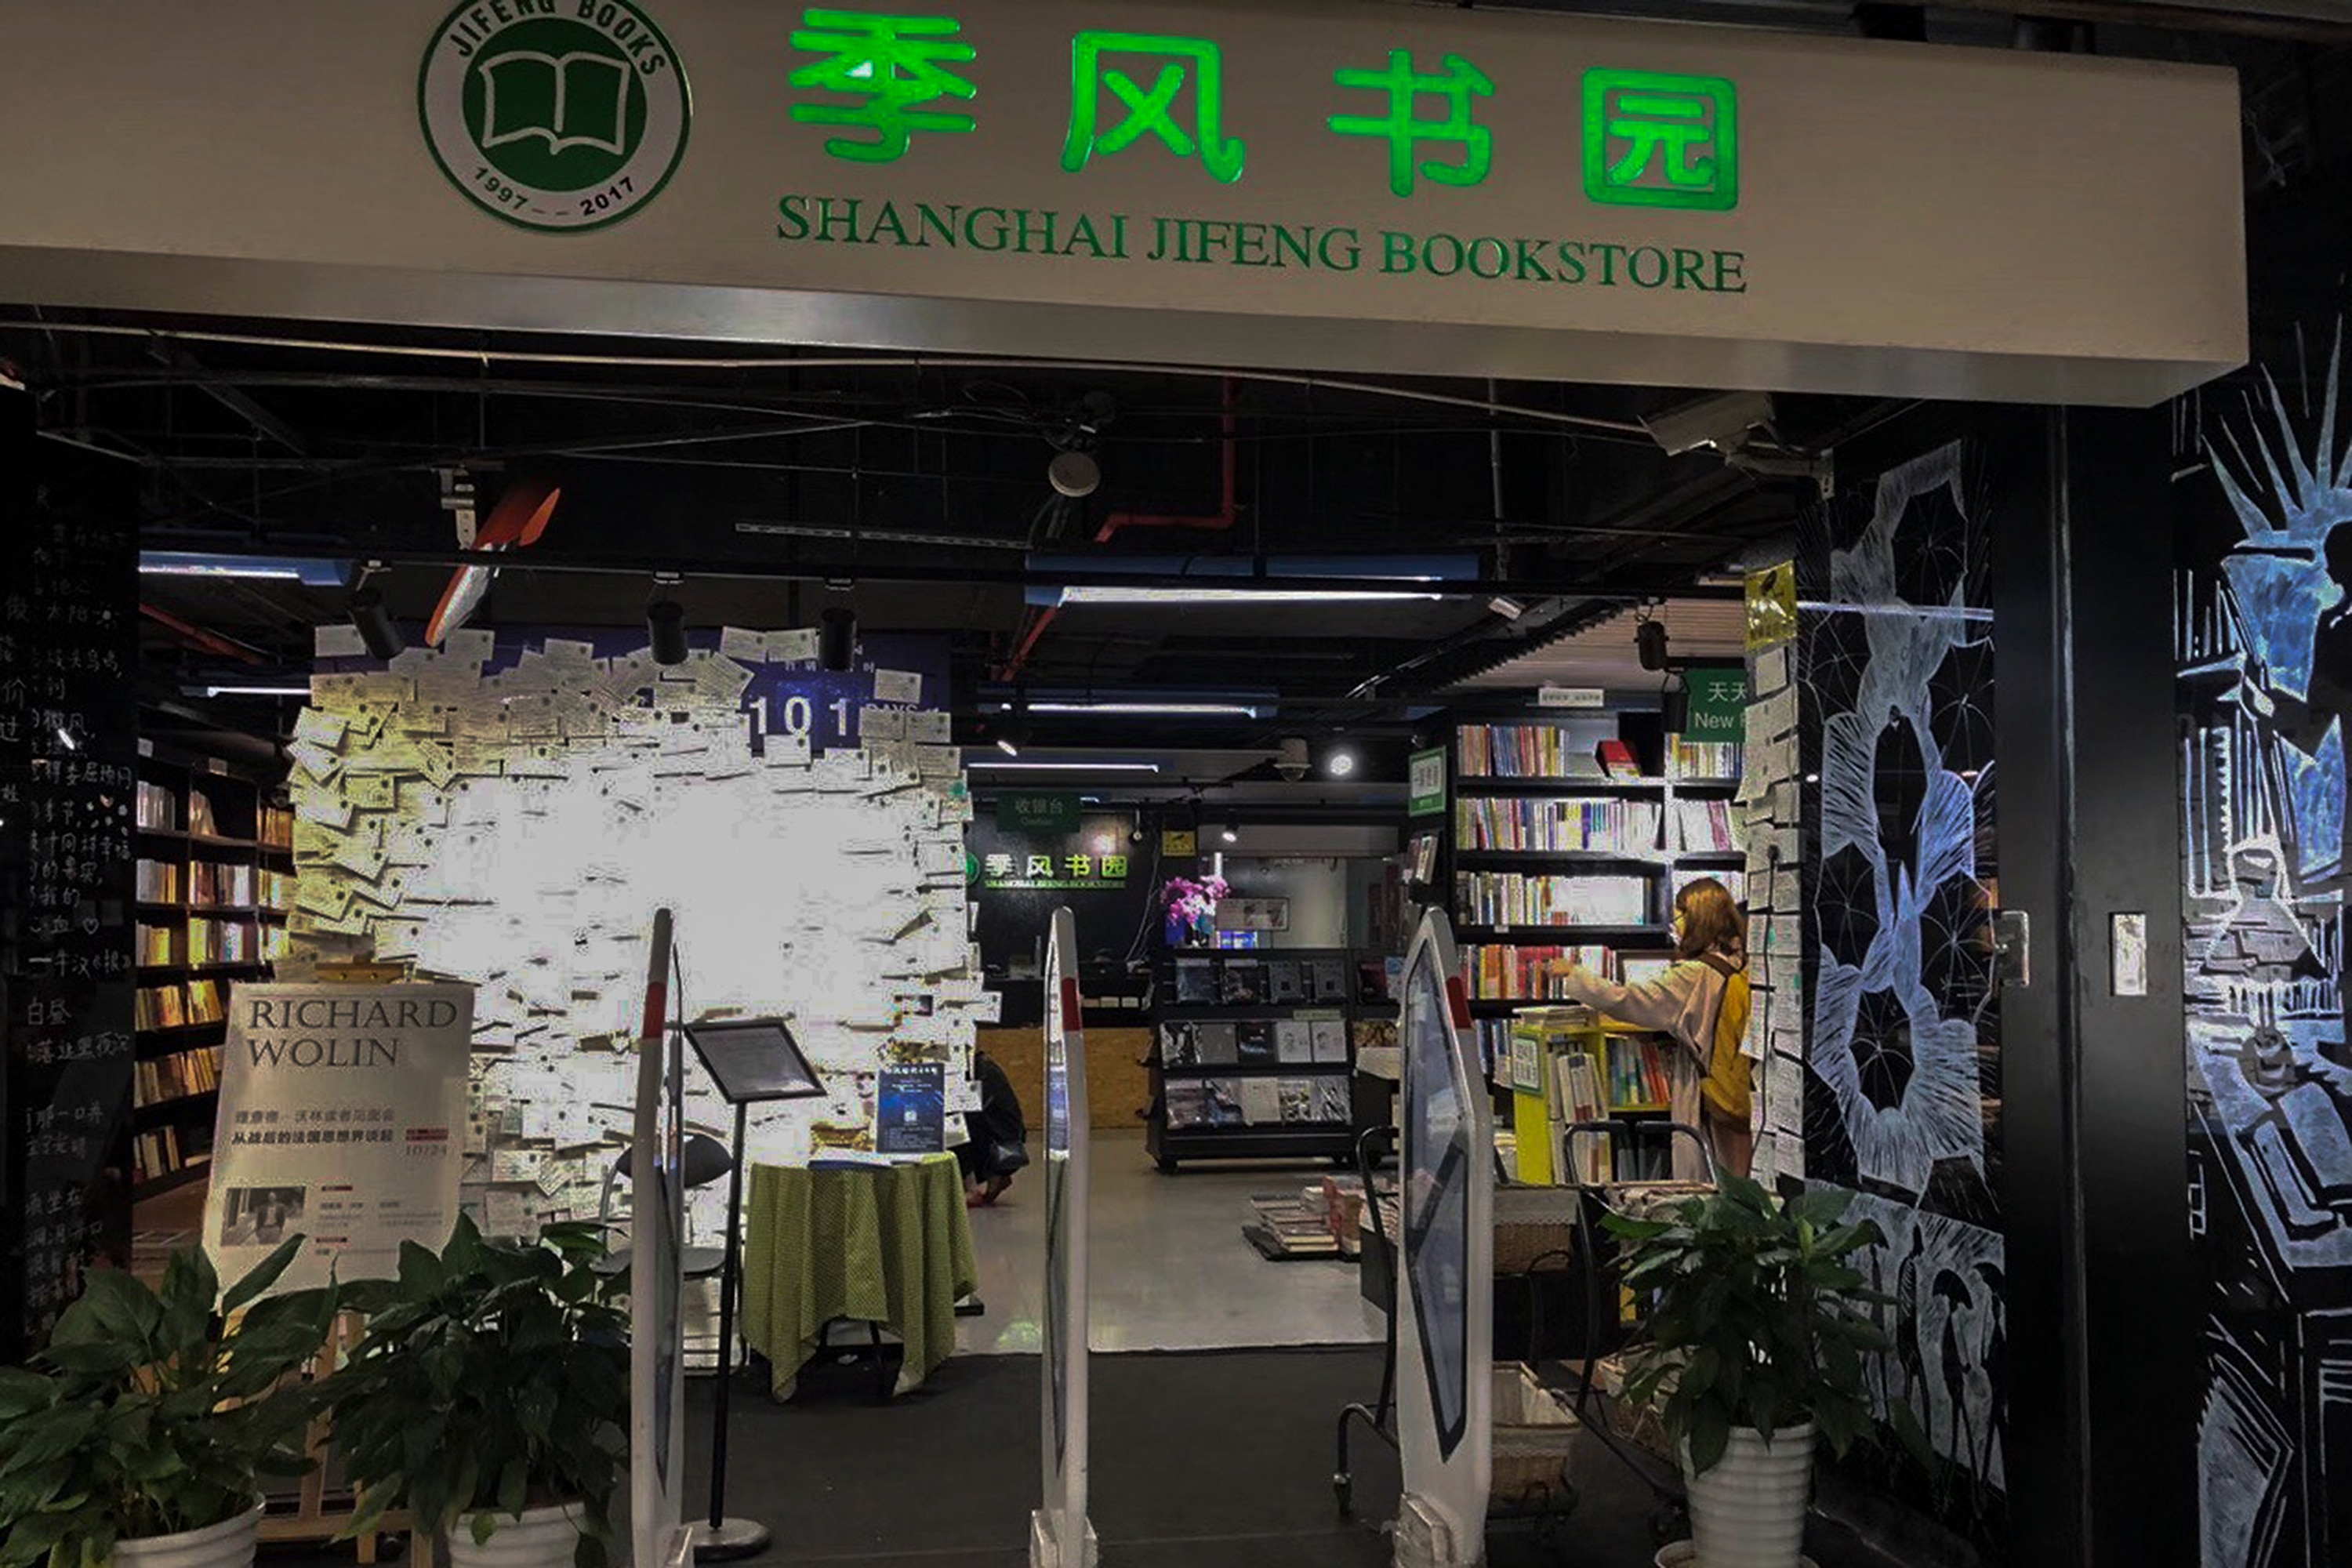 A wide array of Chinese books can be seen on display at Shanghai bookstore